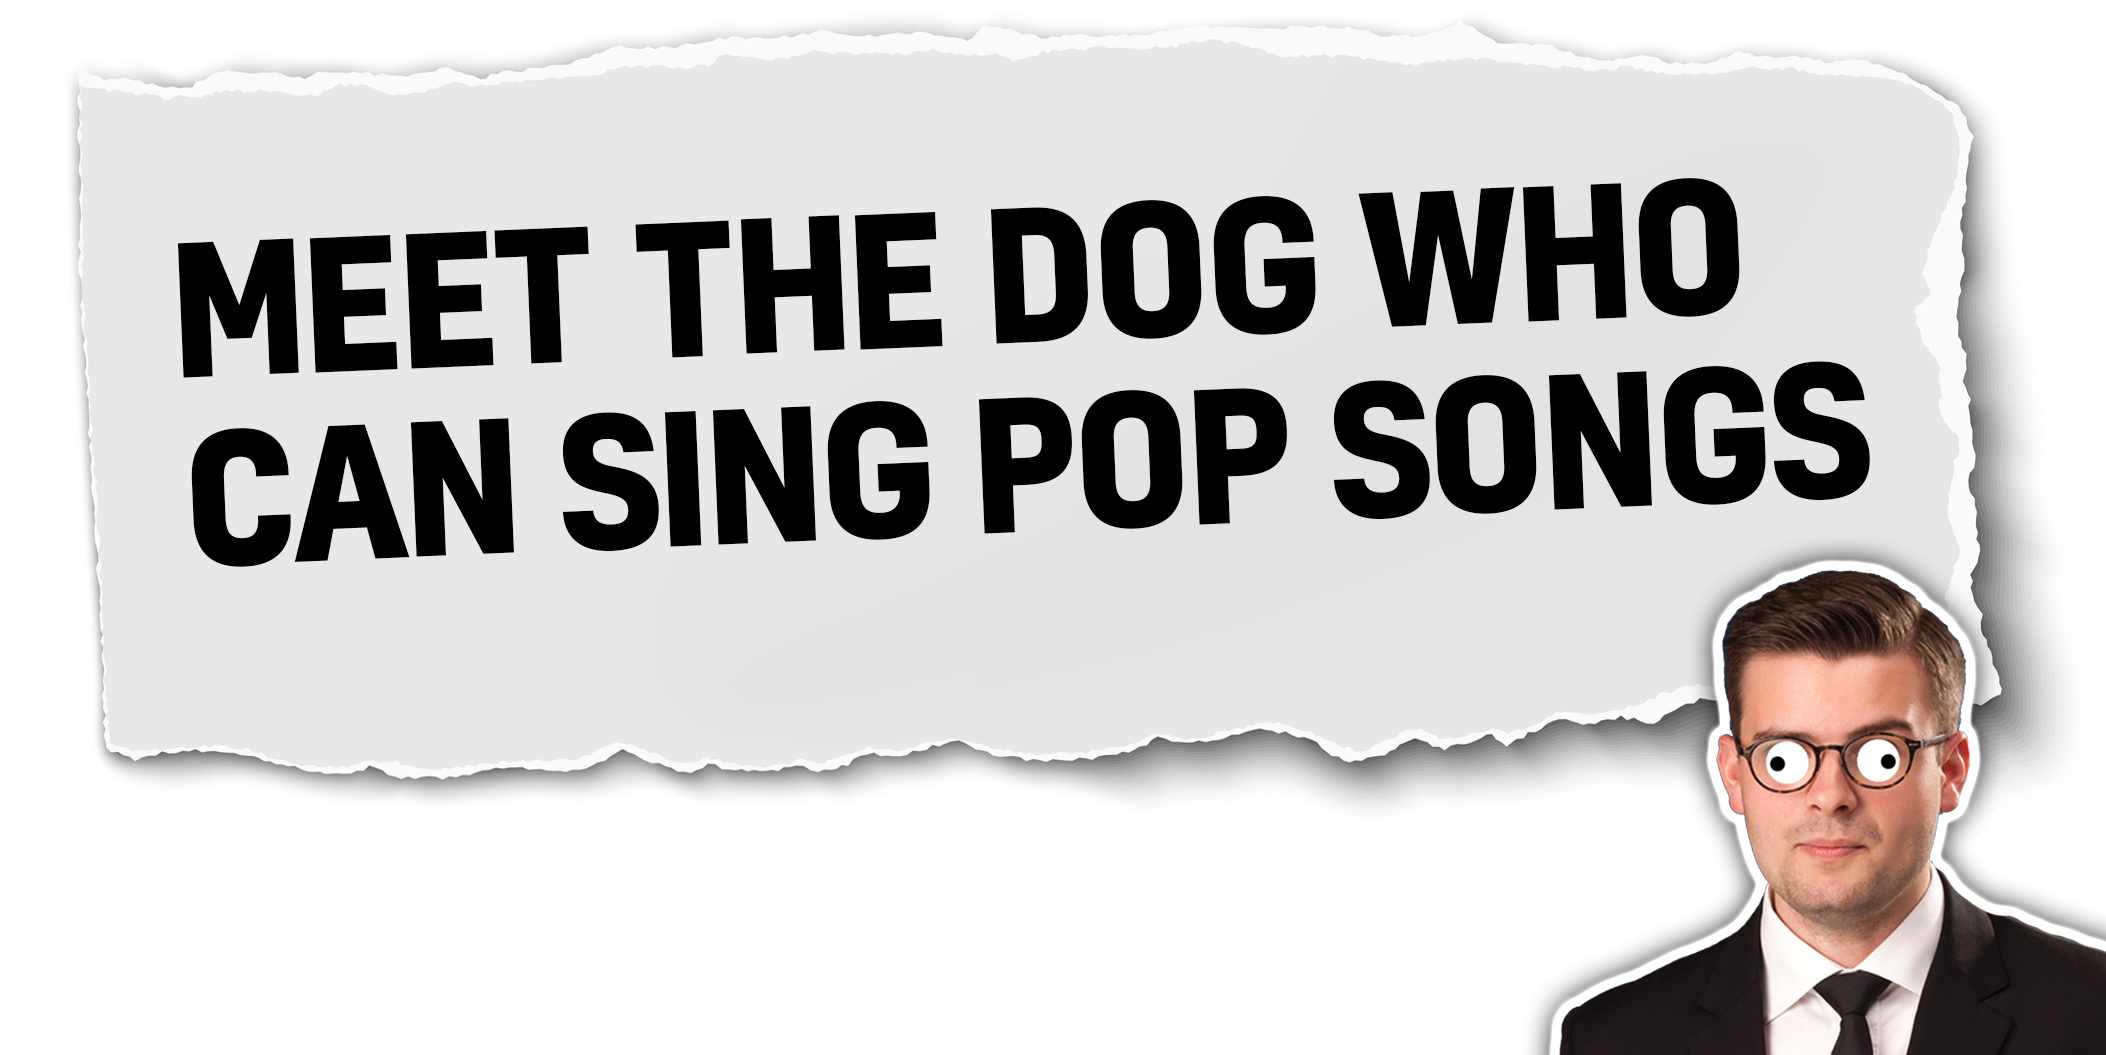 Meet the dog who can sing pop stars